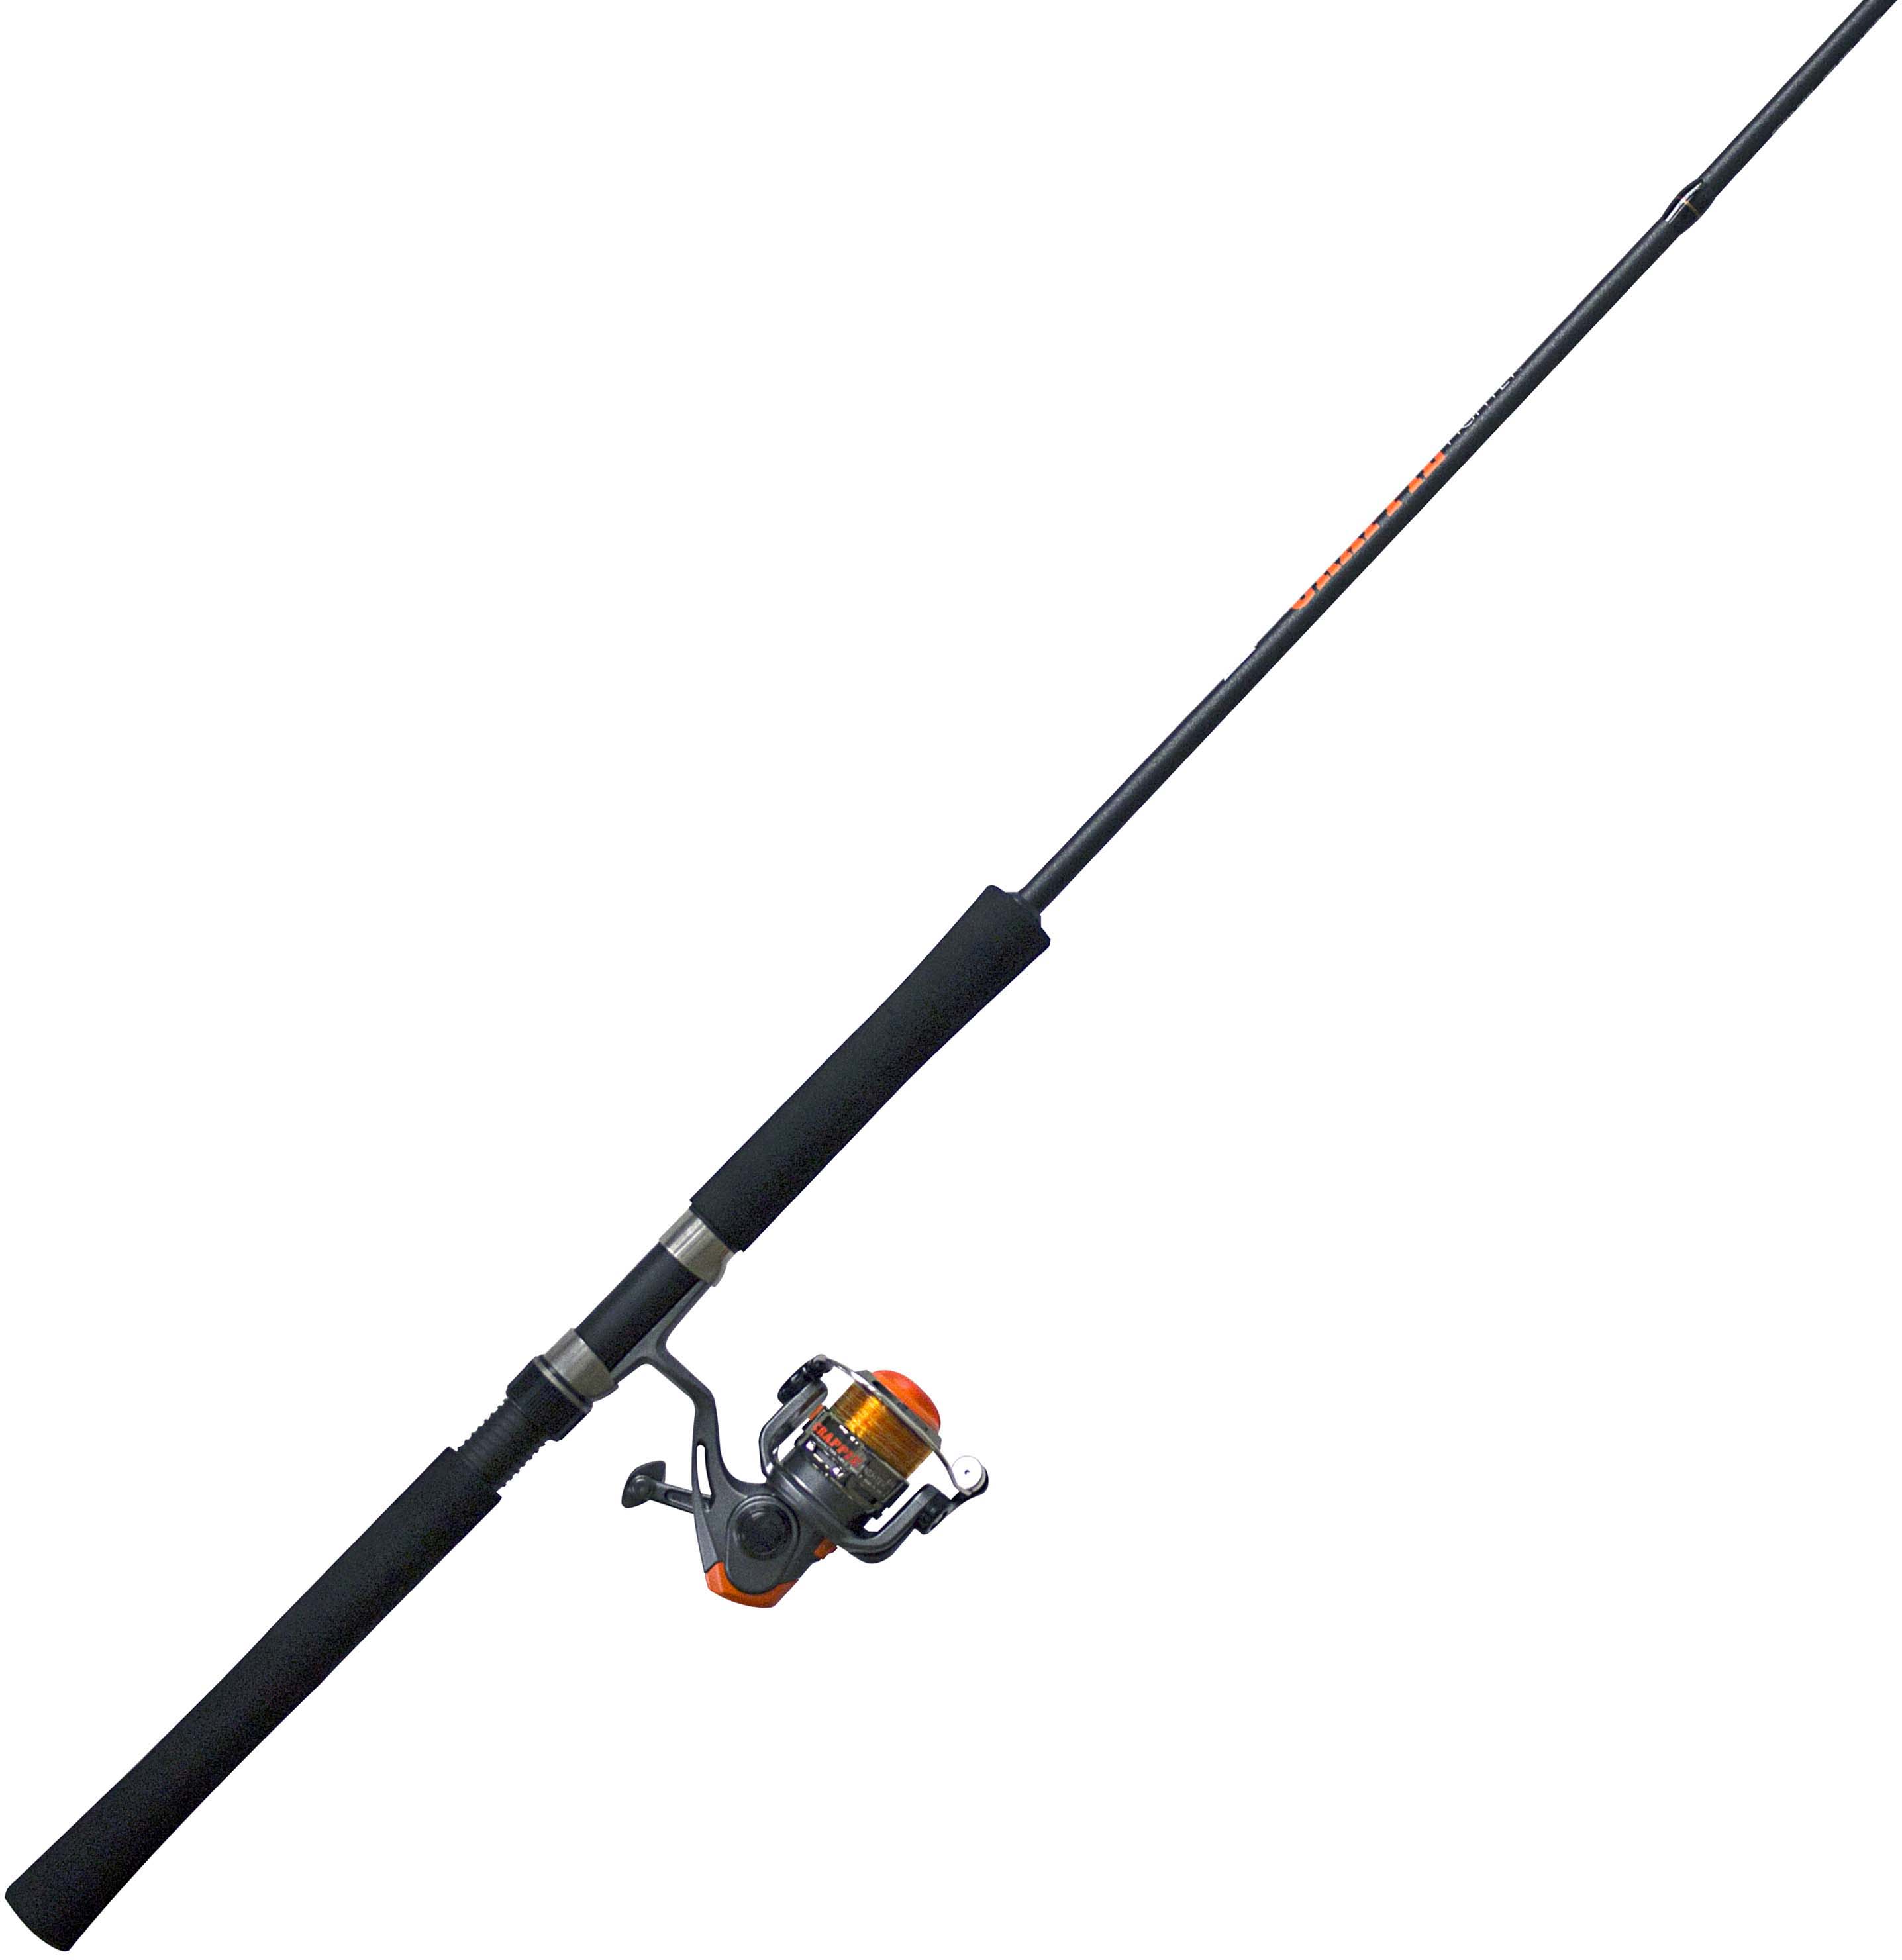 Zebco Spyn Spinning Reel and Fishing Rod Combo, 6-Foot 2-Piece